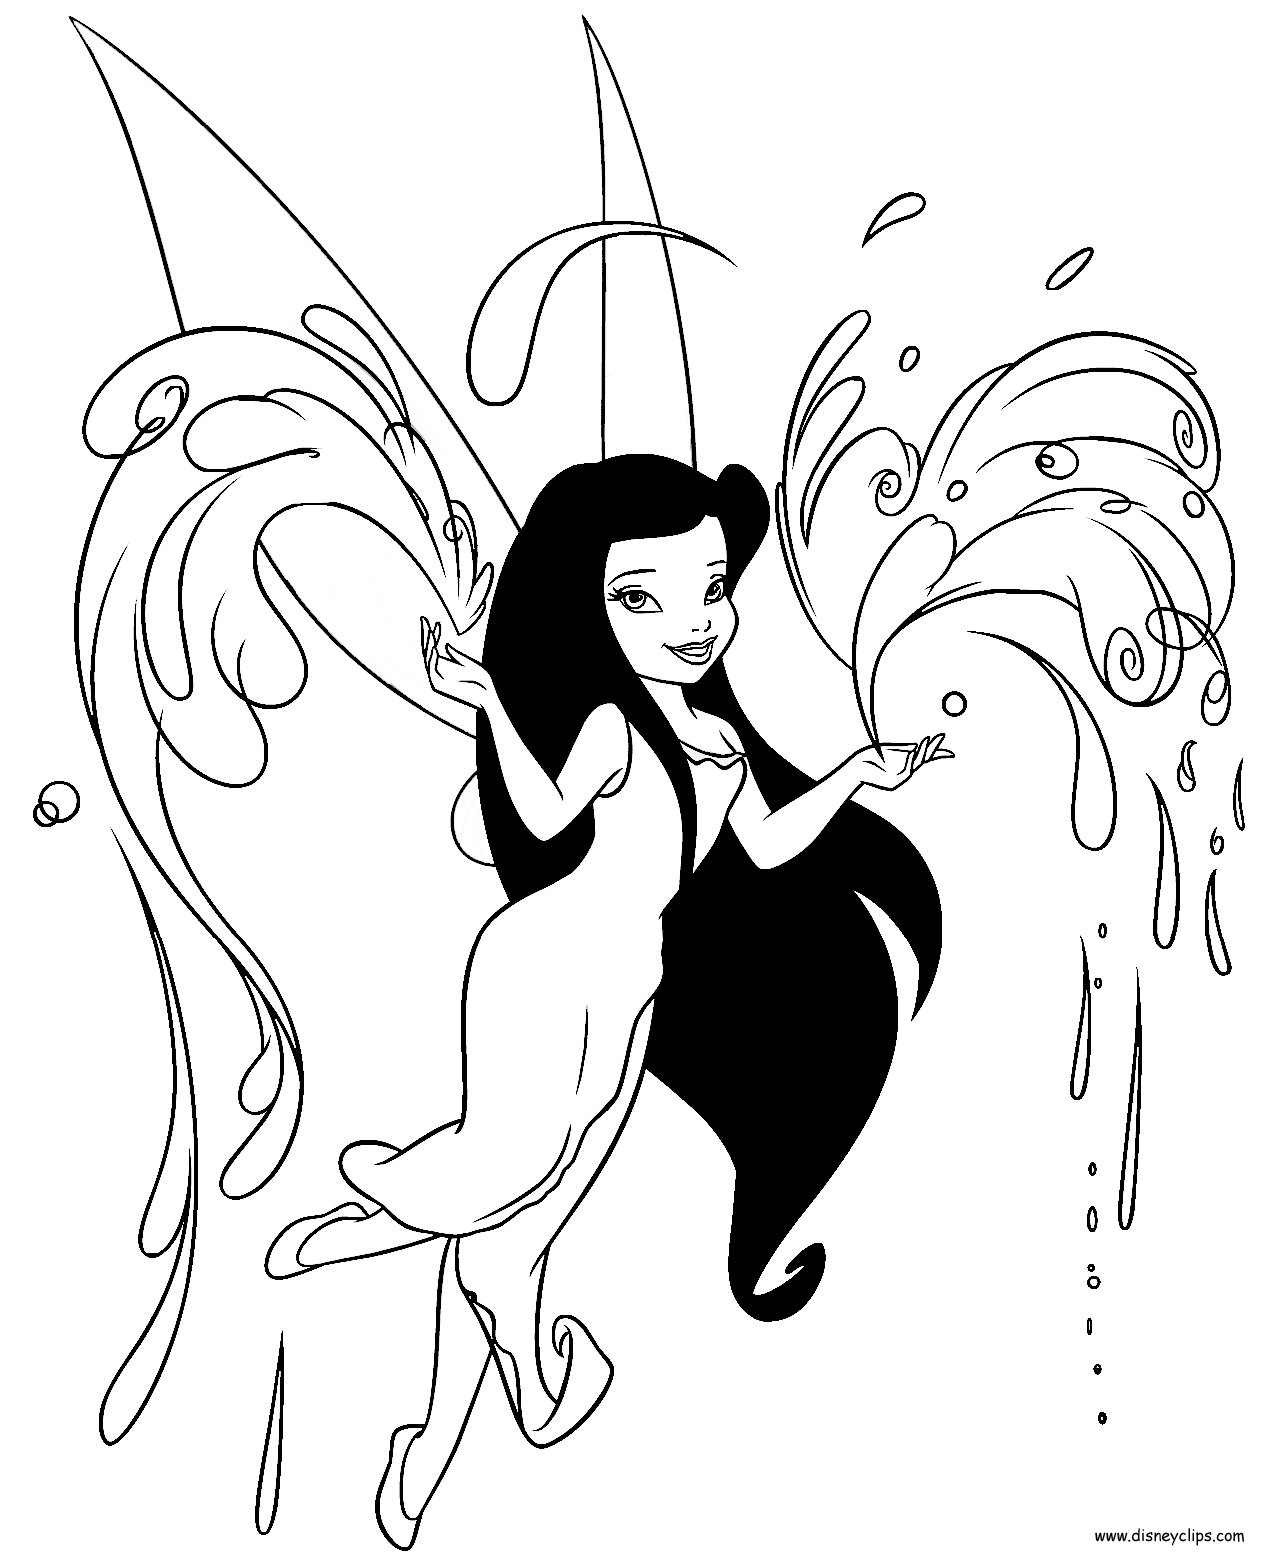 Disney Fairies Easy Fairy Coloring Pages : Free printable coloring